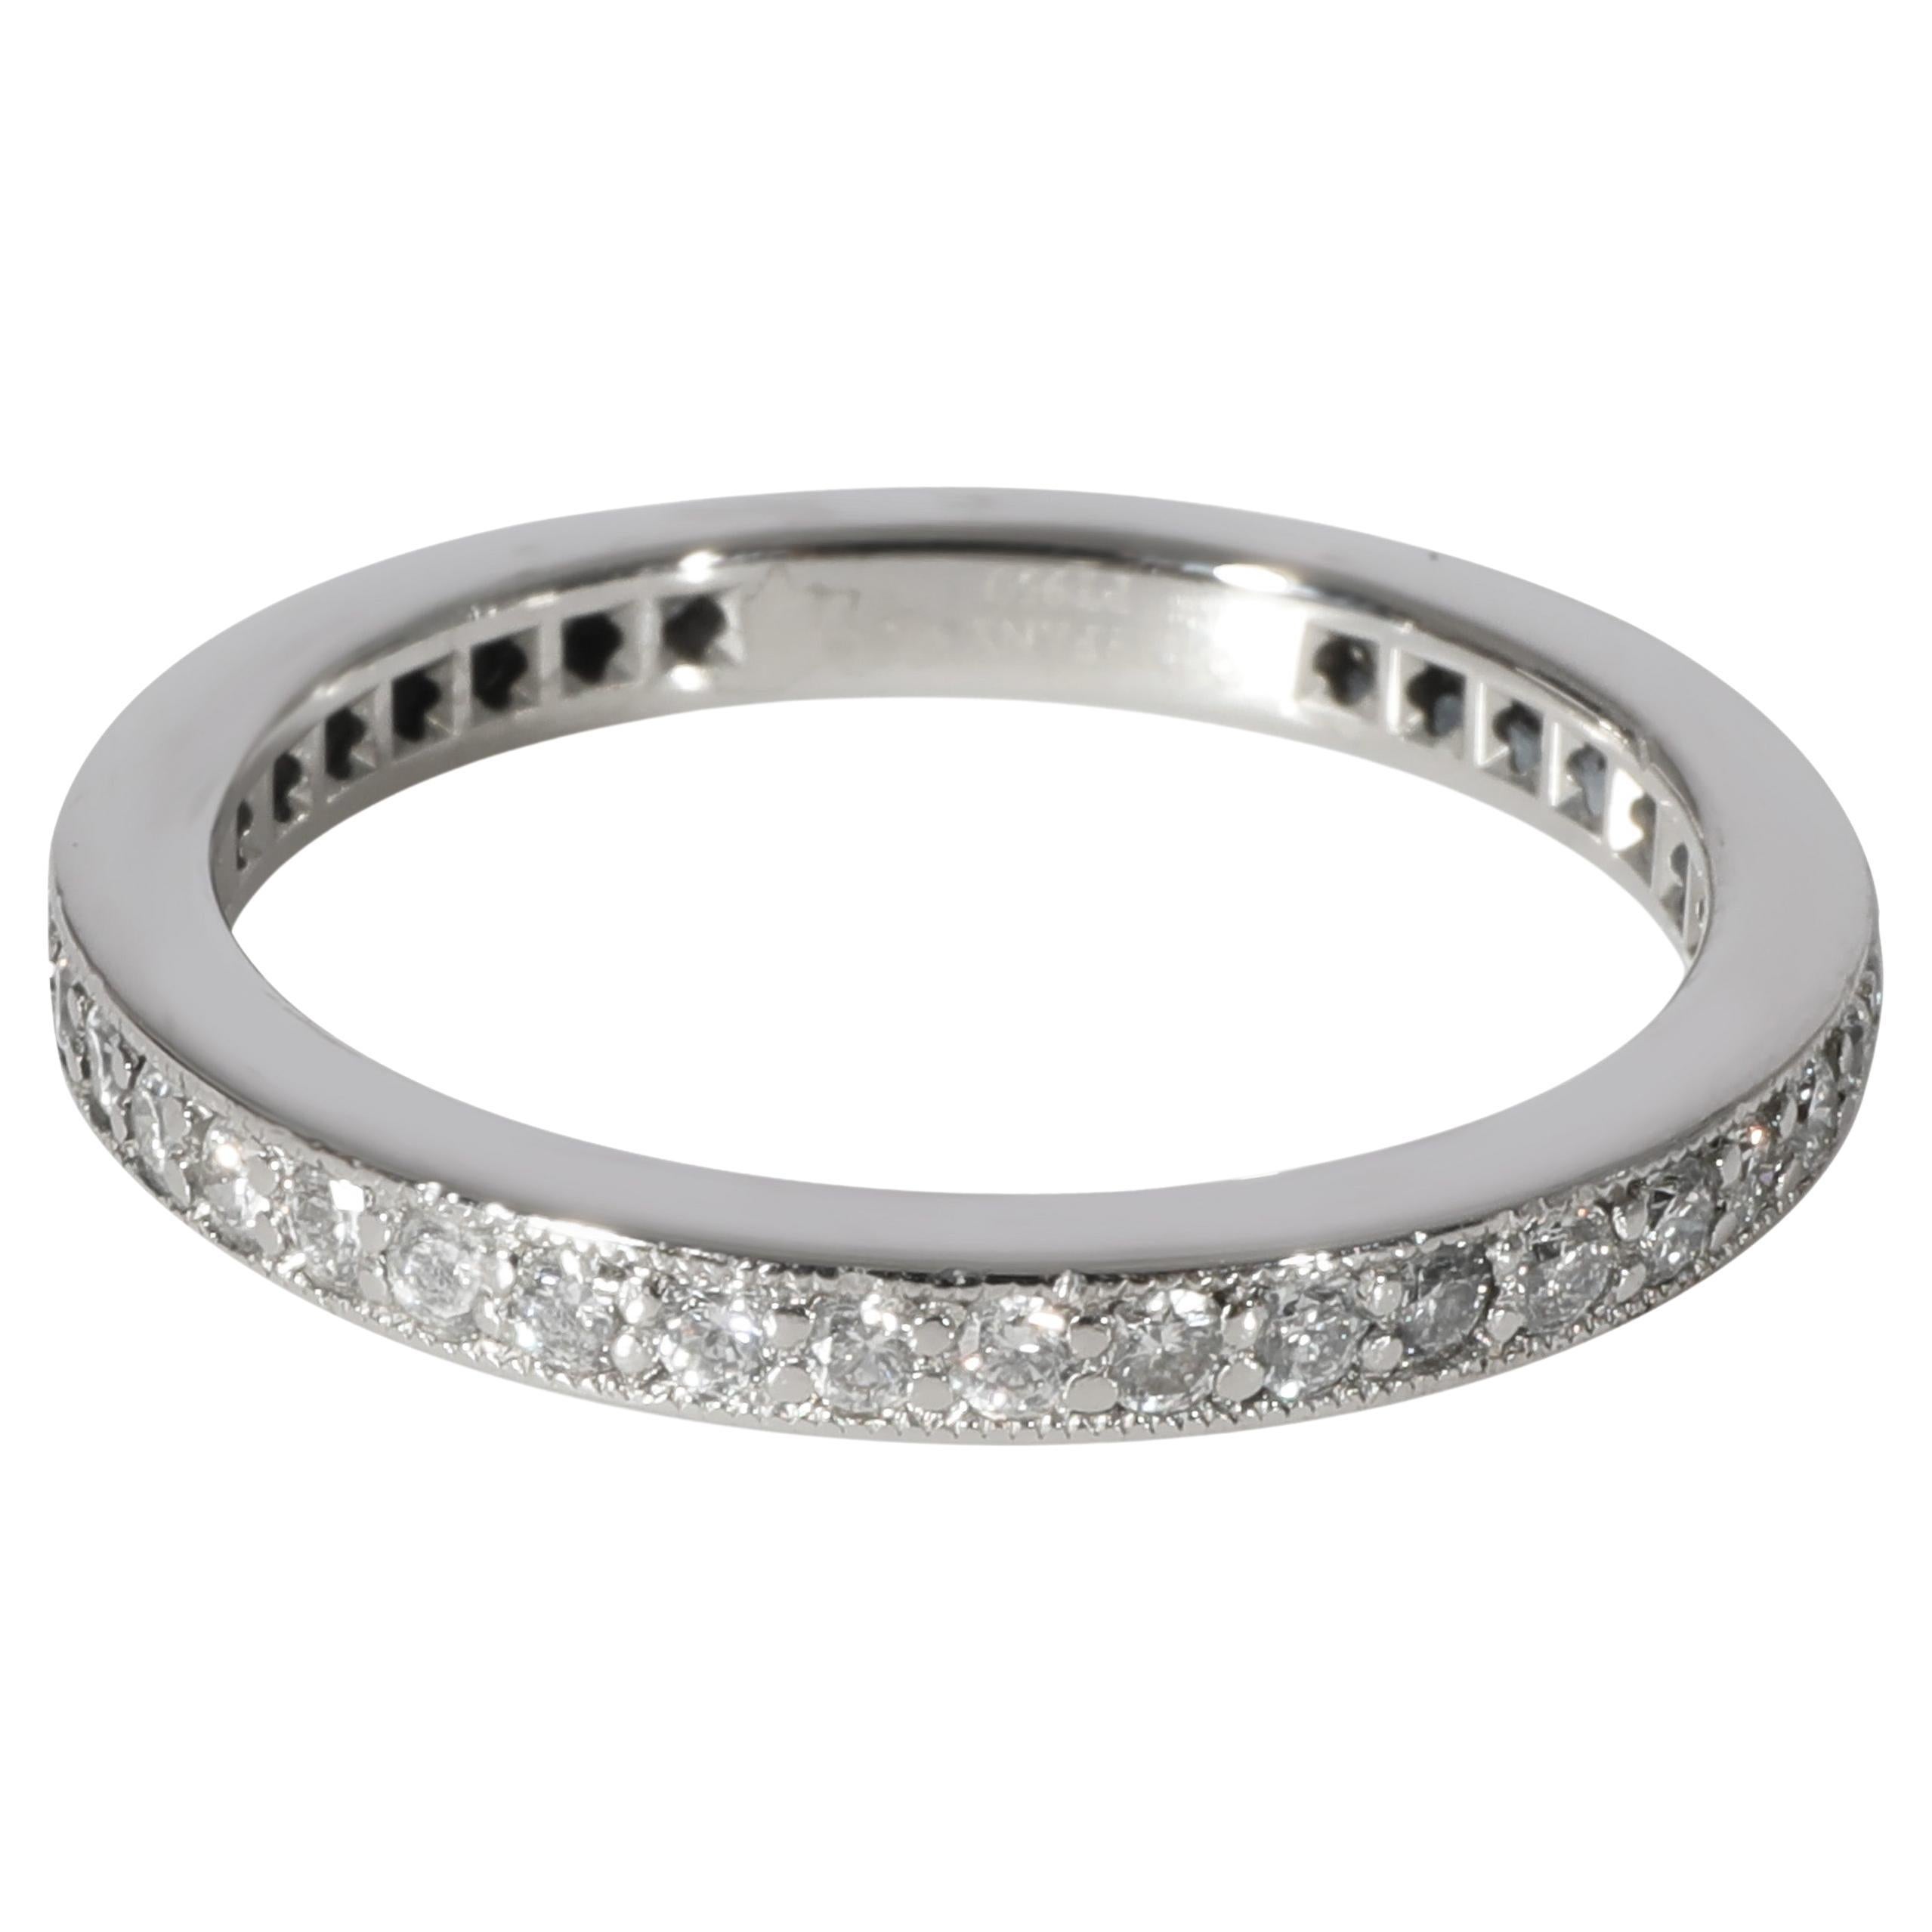 Tiffany & Co. Legacy Diamond Eternity Band in Platinum 0.40 Ctw For Sale